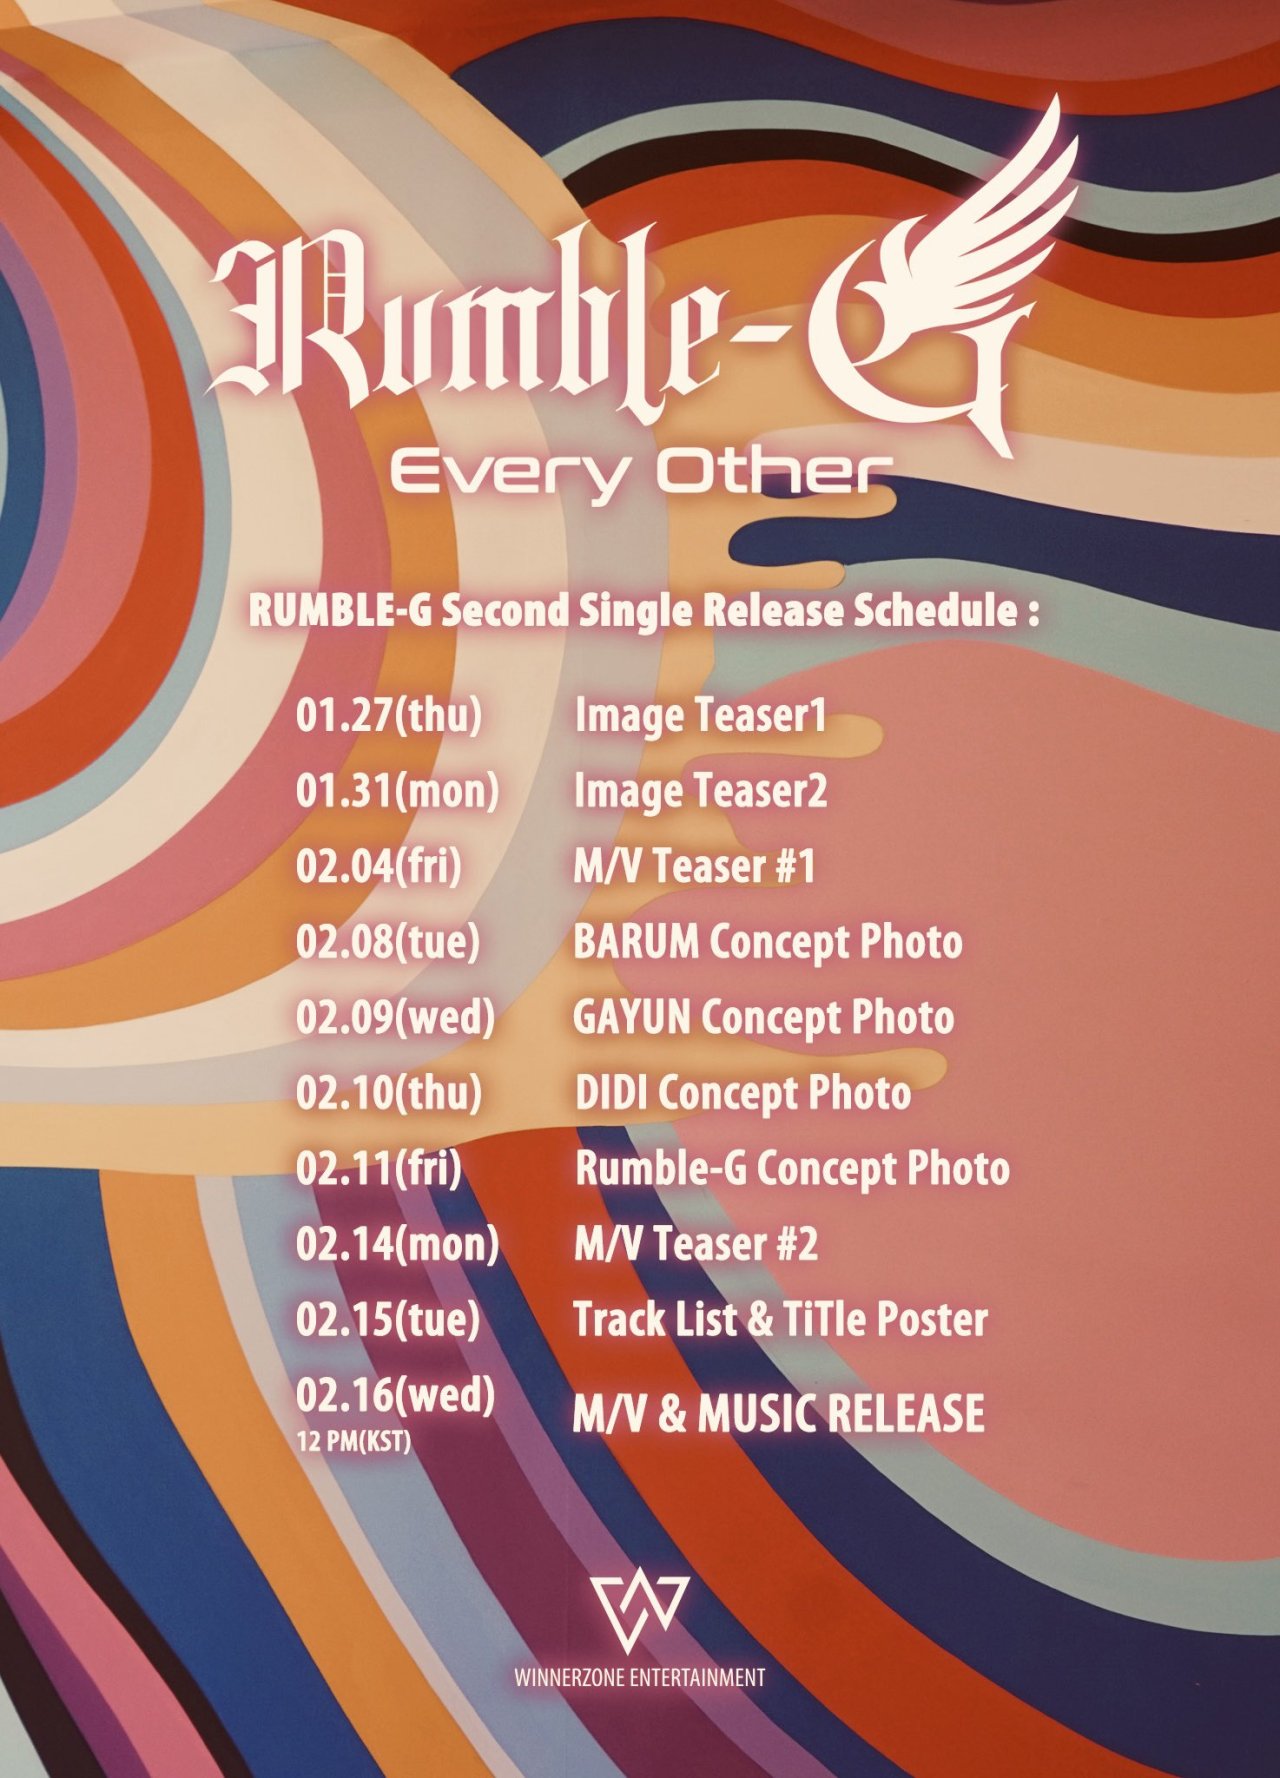 Rookie girl group Rumble-G has released the schedule for their upcoming 2nd single “Every Other” which is scheduled to be released on February 16th. #rumble-g#teaser#schedule#rumble-g: teaser#rumble-g: schedule #rumble-g: every other